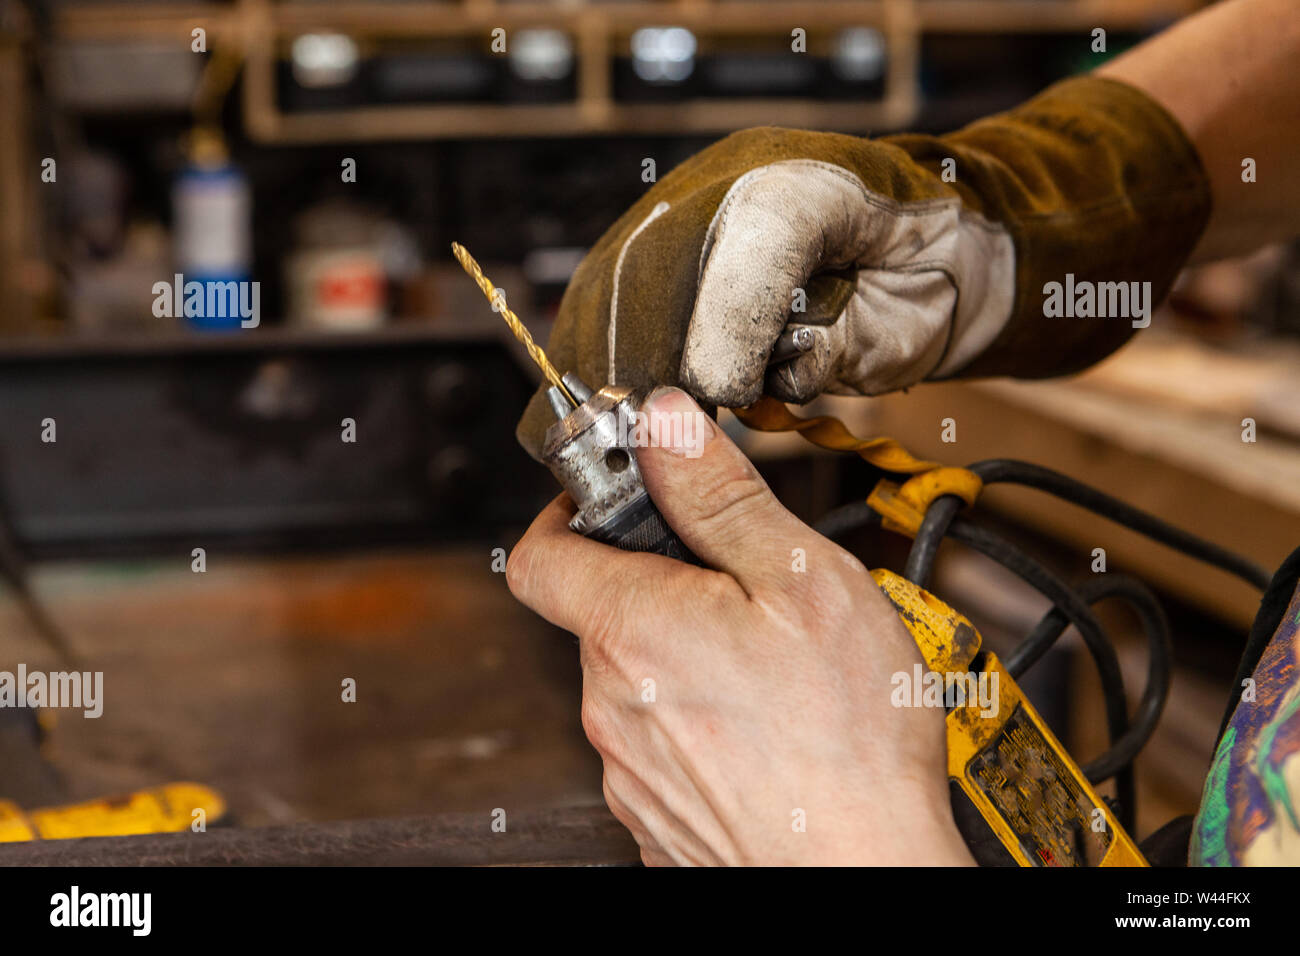 A closeup view on the dirty hands of a metalworker using the chuck of a power drill to replace a spotting bit, used for marking and drilling holes in steel. Stock Photo